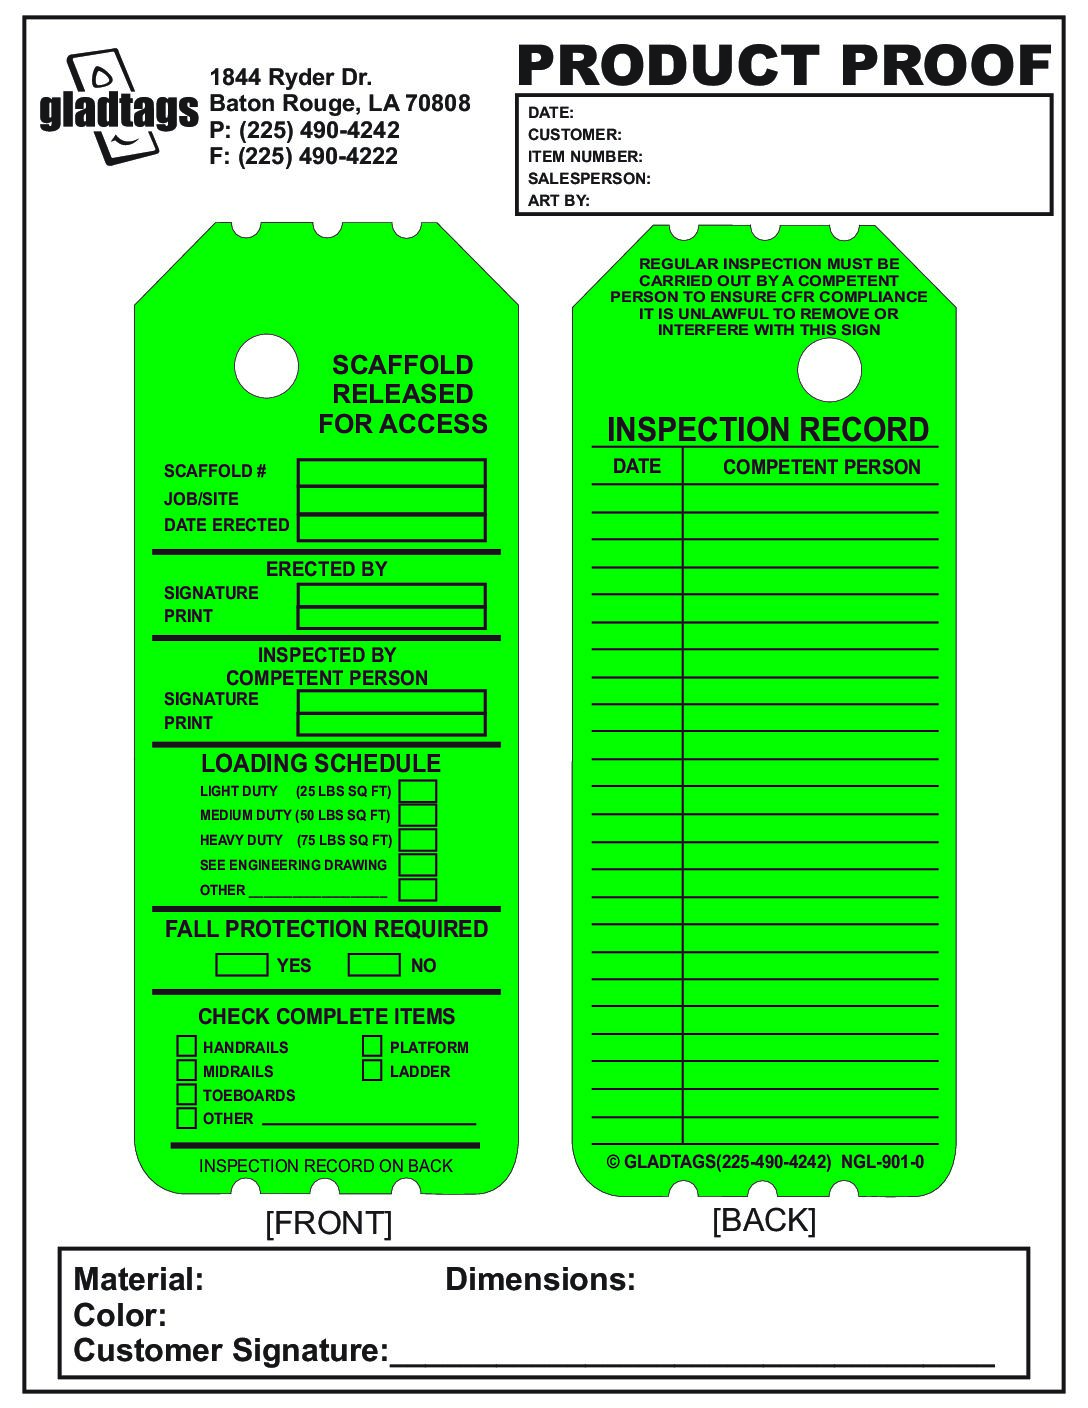 “3.25X8 Green Laminated Scaffold Released For Access Detailed Tag and Loading Schedule with Inspection Record on the Back ” – NGL-901-0